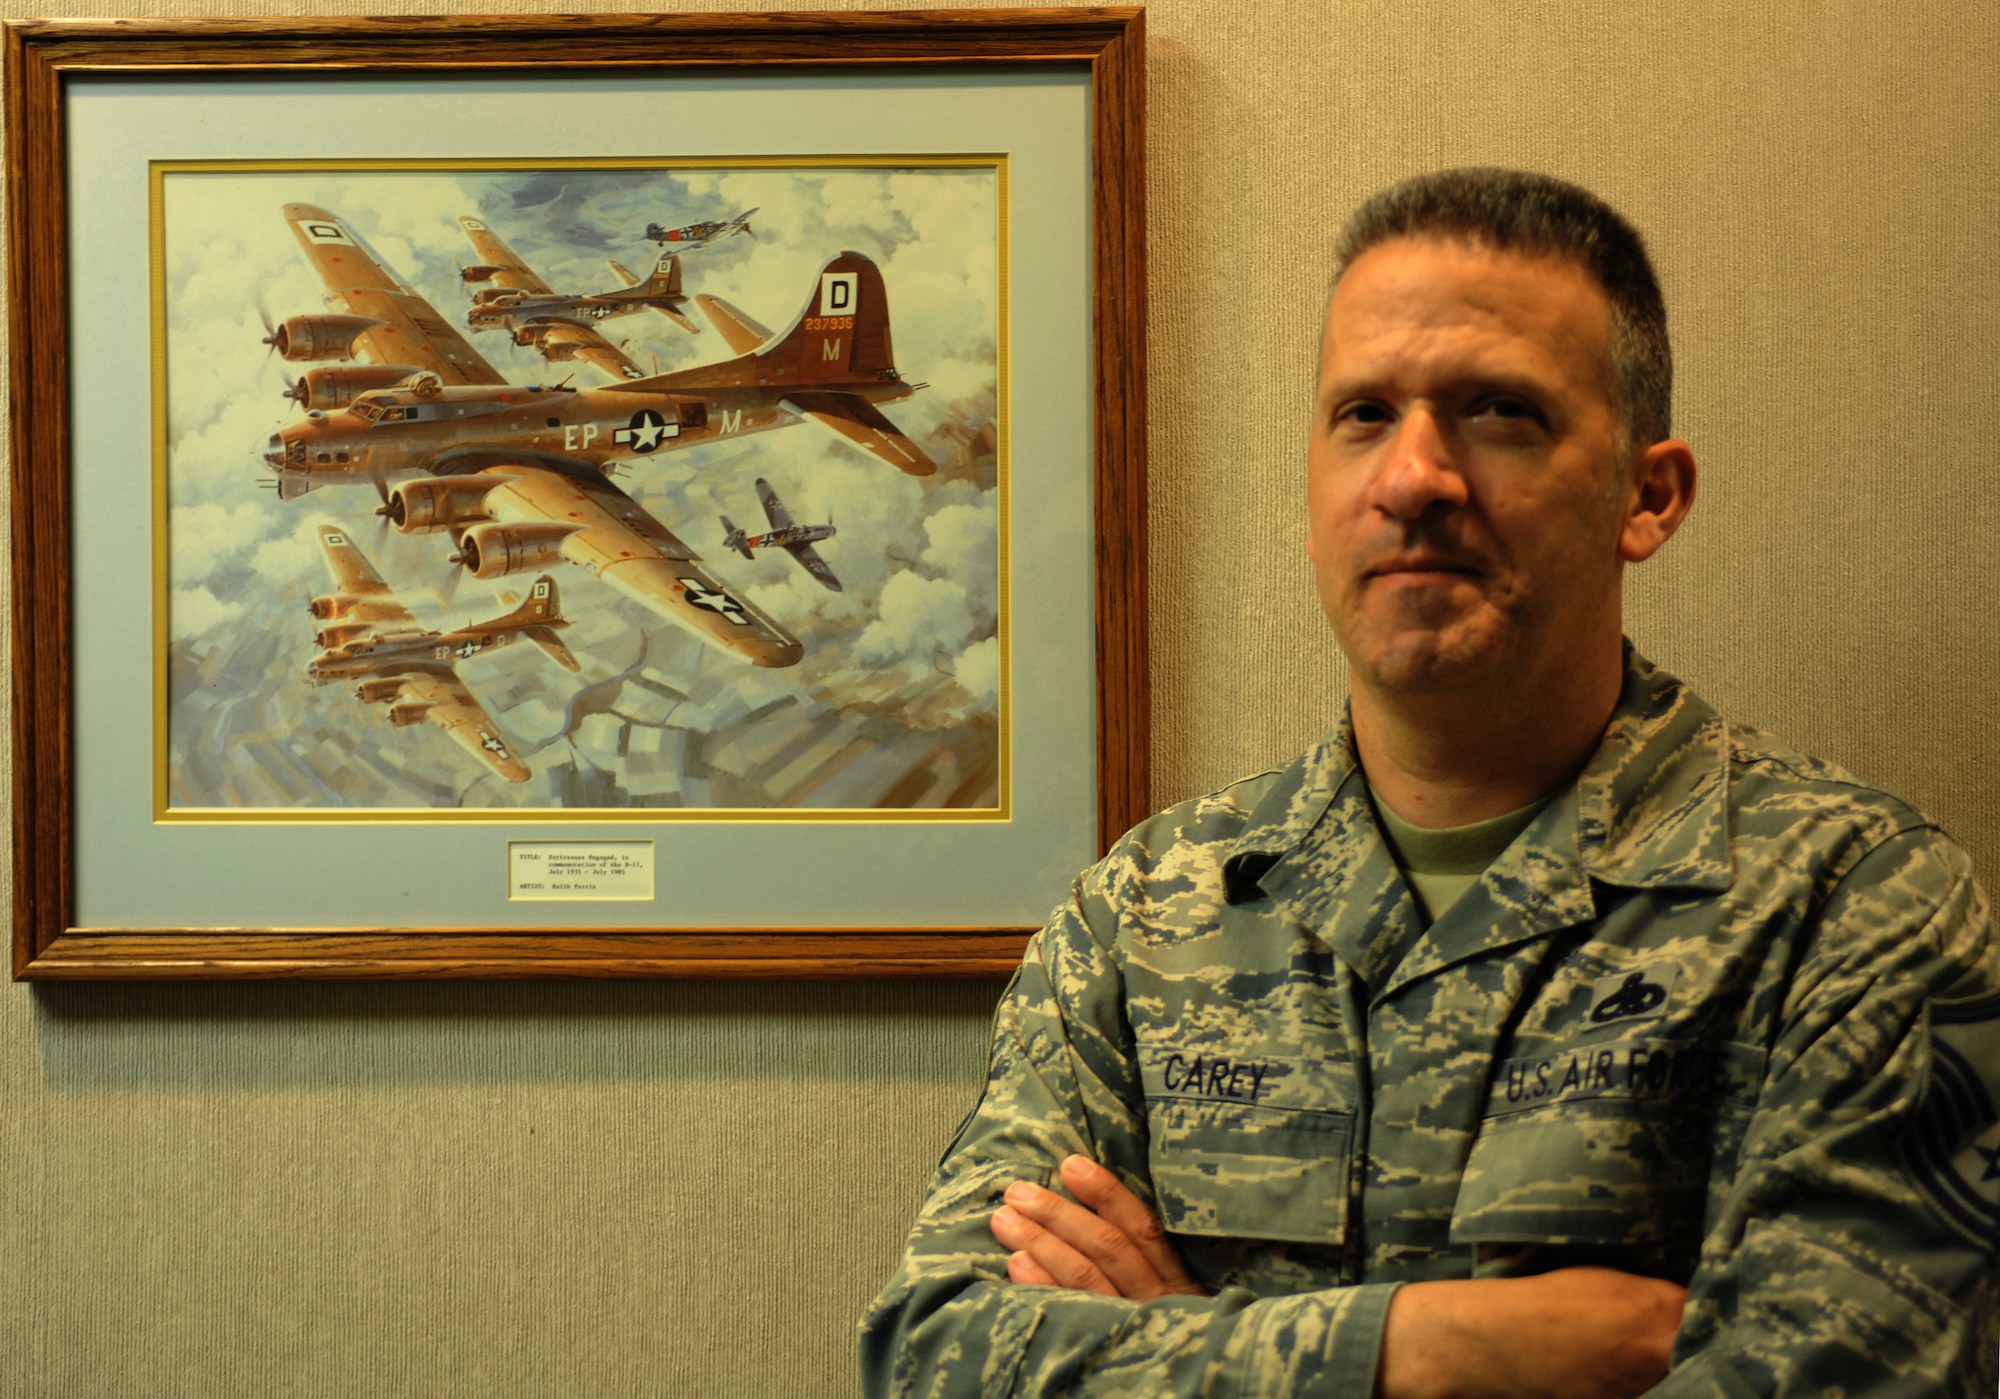 Master Sgt. Matthew Carey stands by an illustration of several B-17 Flying Fortress bombers on a mission during World War II displayed in the hallway outside his office June 2, 2014, at Ellsworth Air Force Base, S.D. Carey said the image reminds him of his grandfather, B-17 tail gunner Staff Sgt. James “Rae” Carey, and his experiences after he signed in for duty at a base in England one day after the invasion of Normandy began.  Carey is the 28th Bomb Wing Treaty Compliance Office superintendent. (U.S. Air Force photo/Senior Airman Yash Rojas)